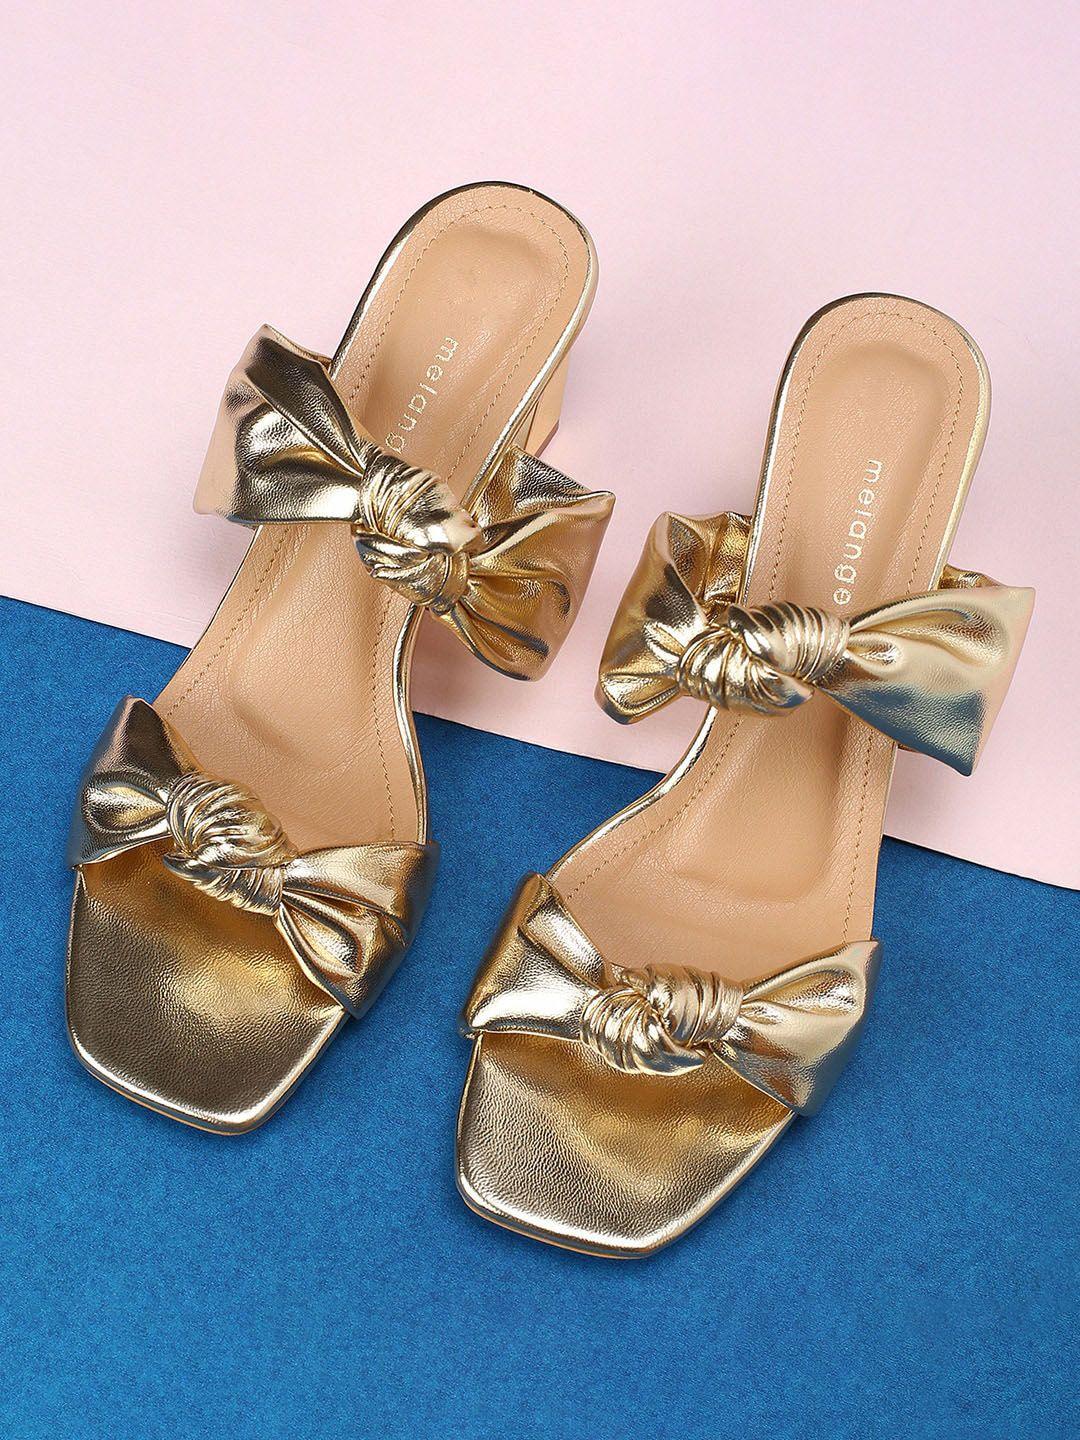 melange-by-lifestyle-gold-toned-block-sandals-with-bows